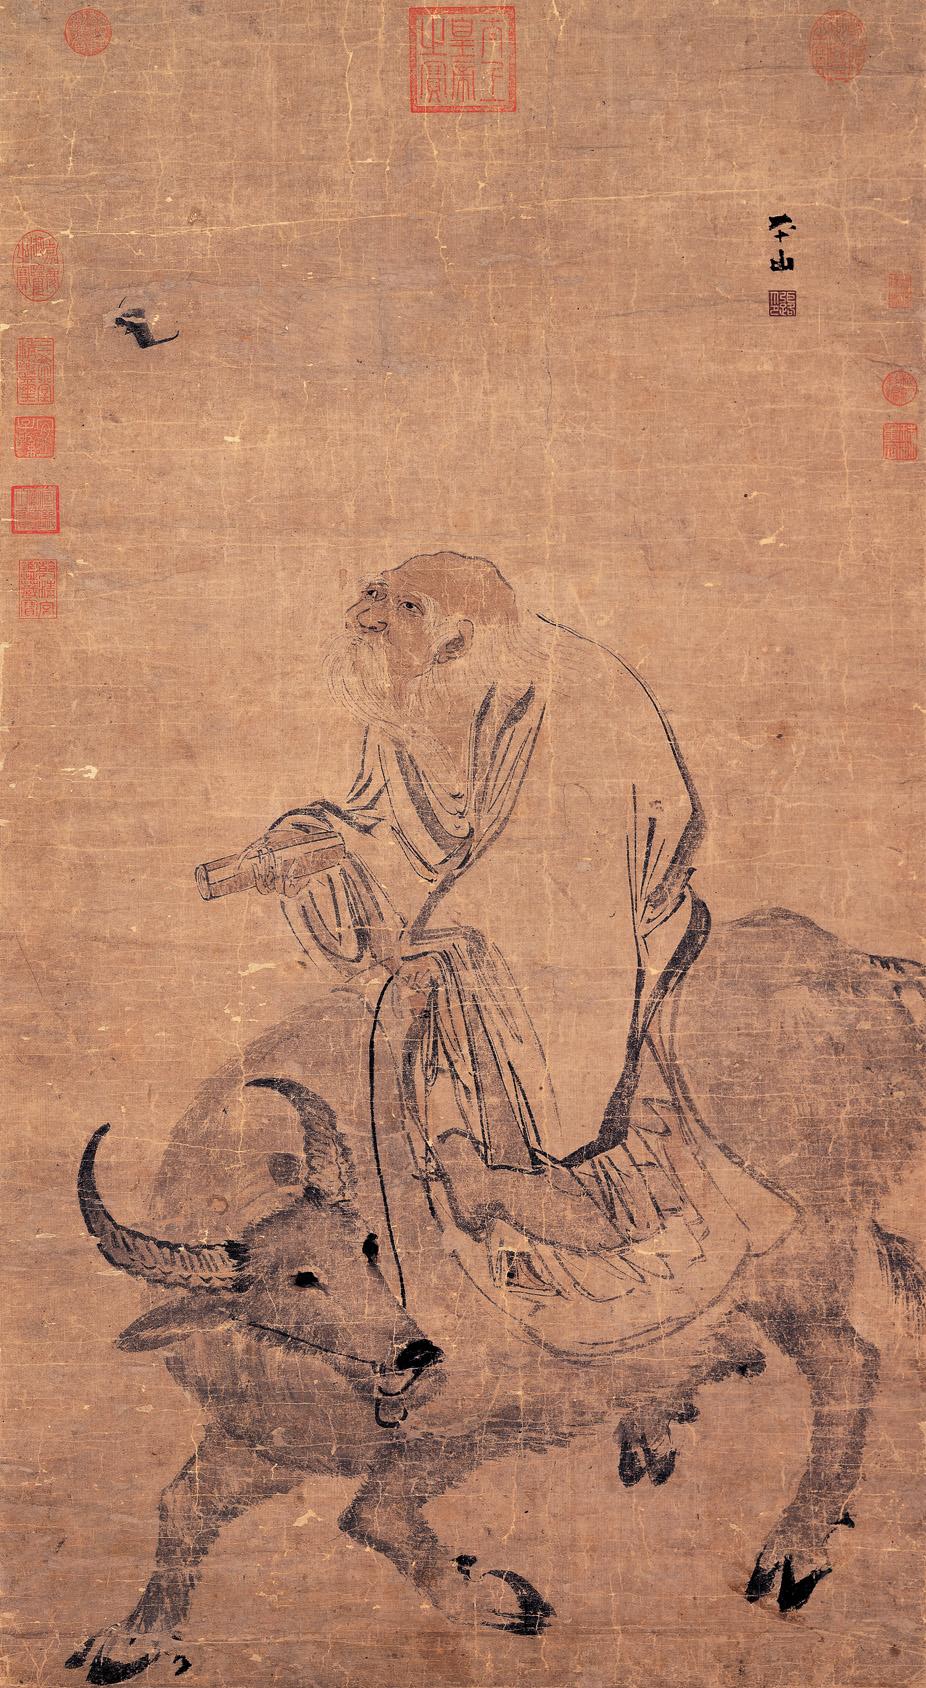 A Ming Dynasty hanging scroll depicting the story of ancient Taoist philosopher Laozi riding on the back of an ox and carrying the "Tao Te Ching," the primary text of Taoist thought that he authored. (National Palace Museum, Public Domain)